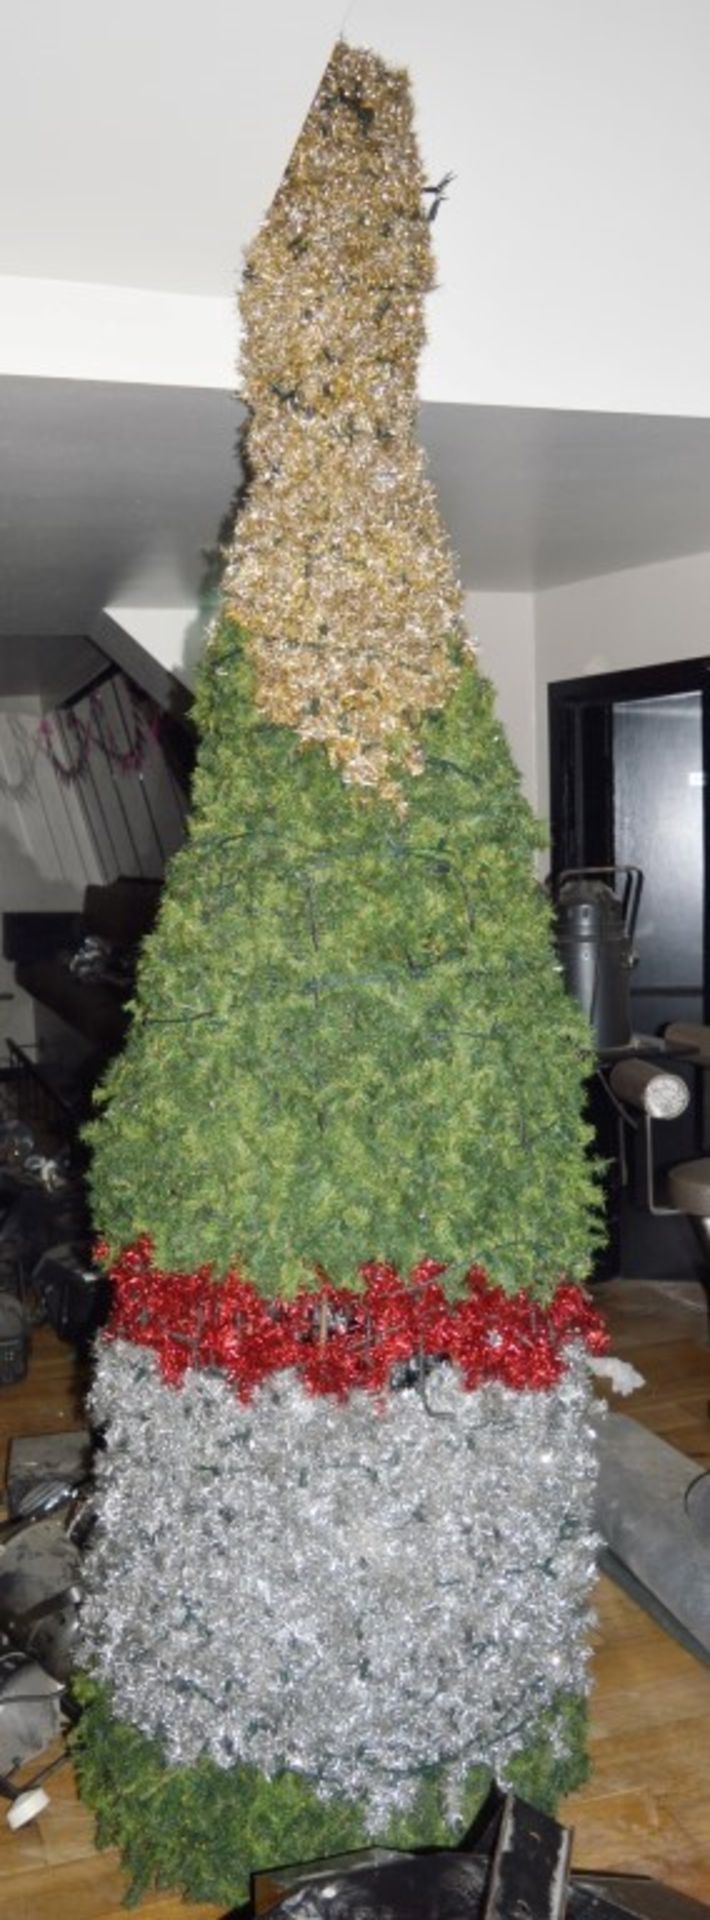 1 x Giant WINE BOTTLE Shaped CHRISTMAS TREE - Stands Approx 9ft Tall - 80cm Diameter - HUGE SIZE -